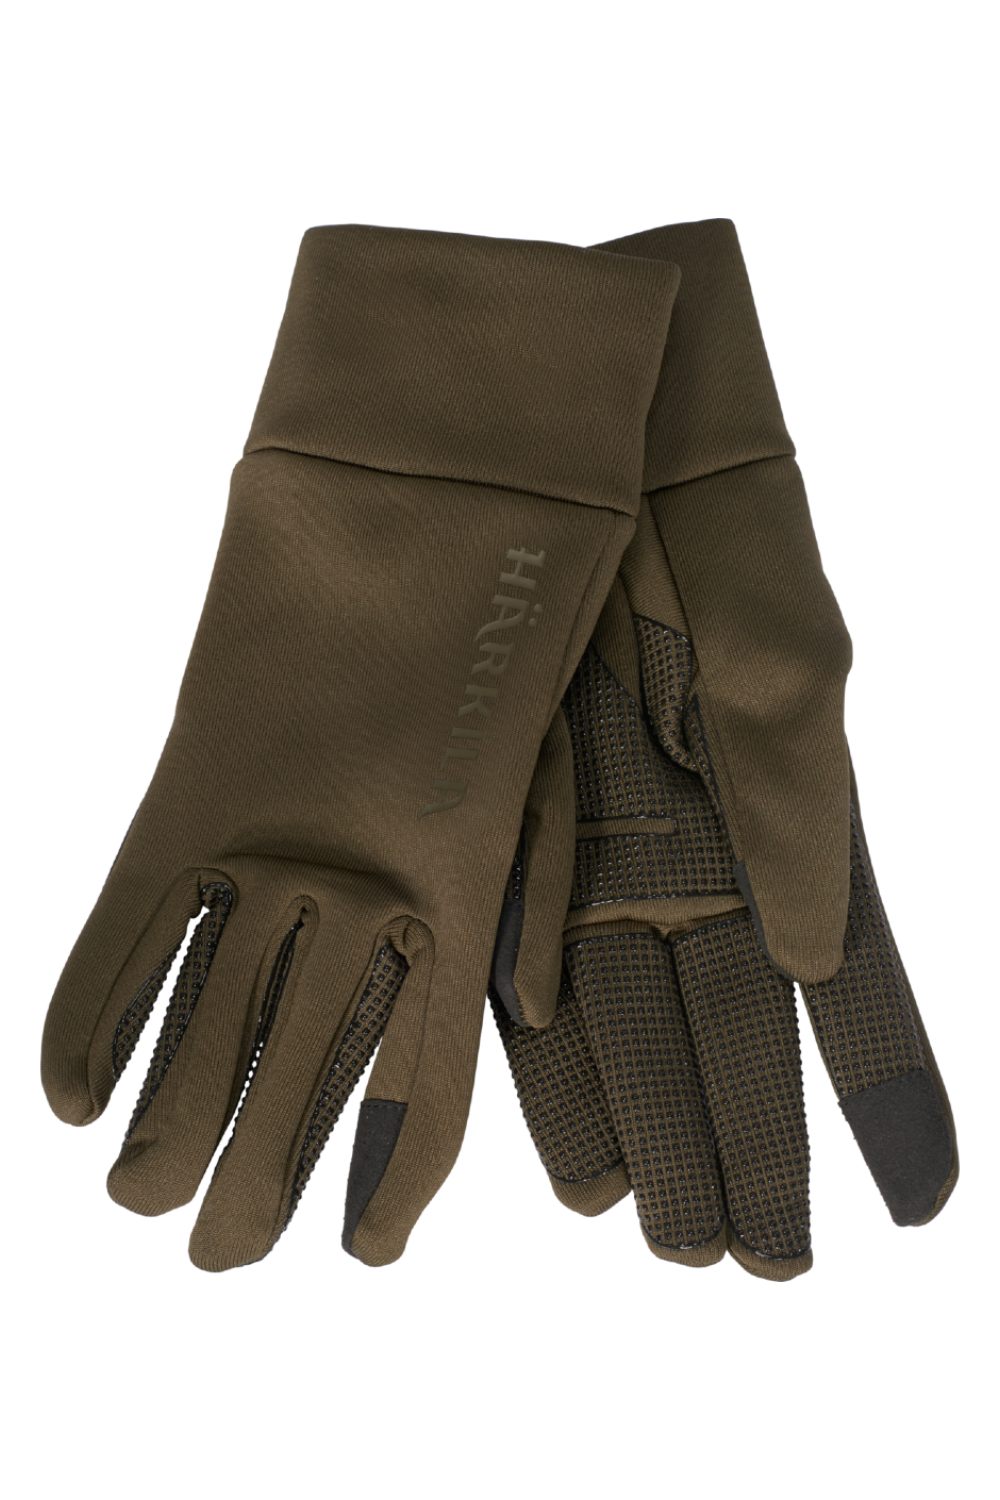 Harkila Power Stretch Gloves in Willow Green 